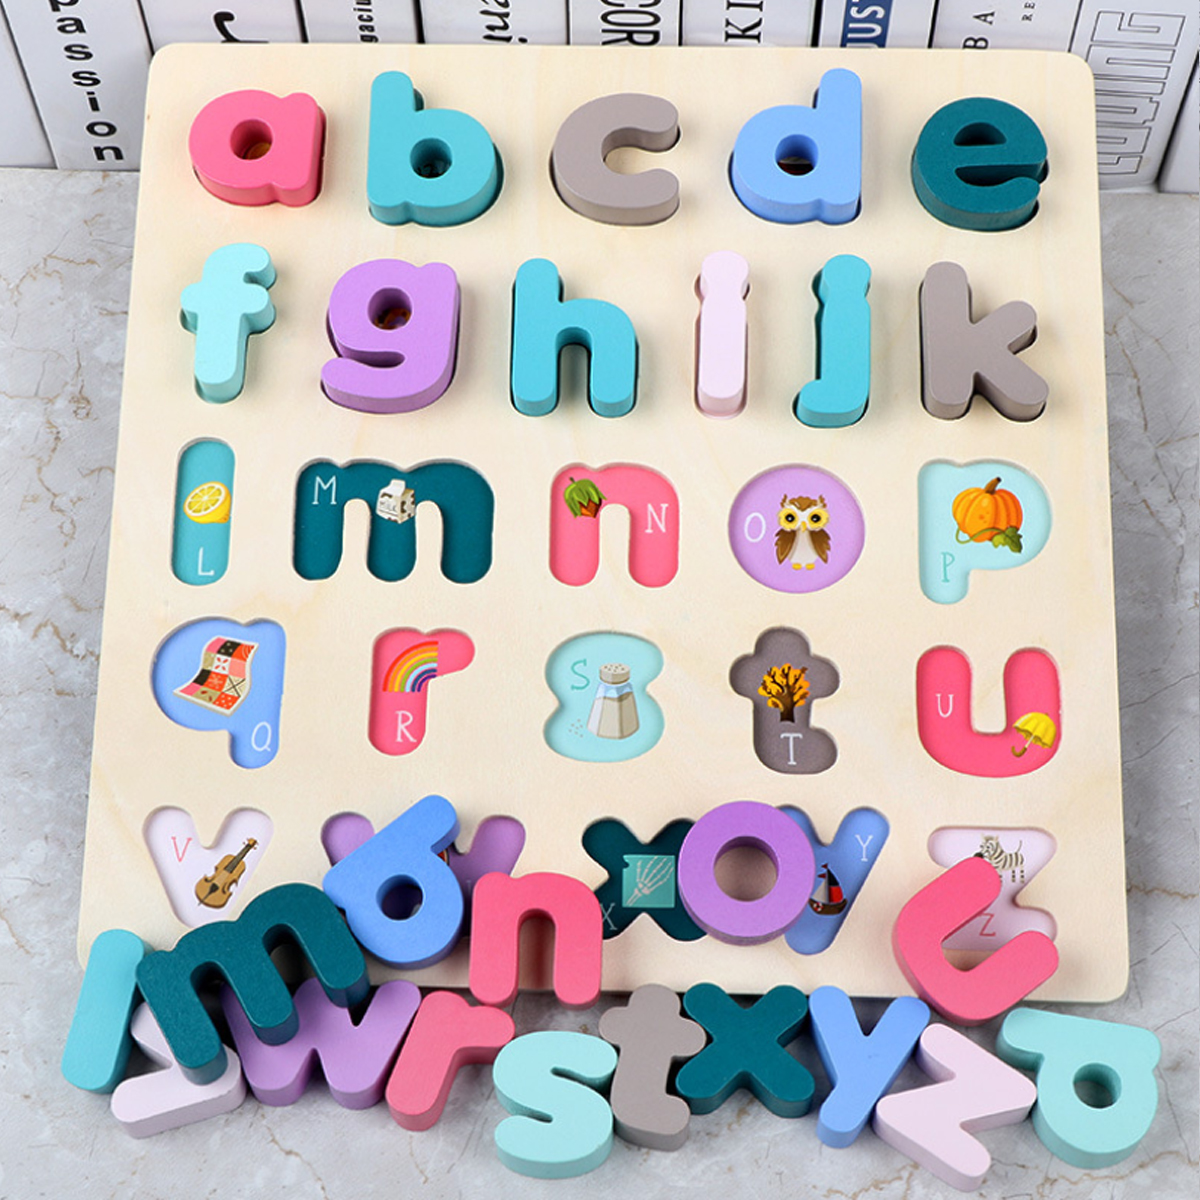 Alphanumeric-Board-Wooden-Jigsaw-Volume-Wooden-Baby-Young-Children-Early-Education-Educational-Toys-1635558-2